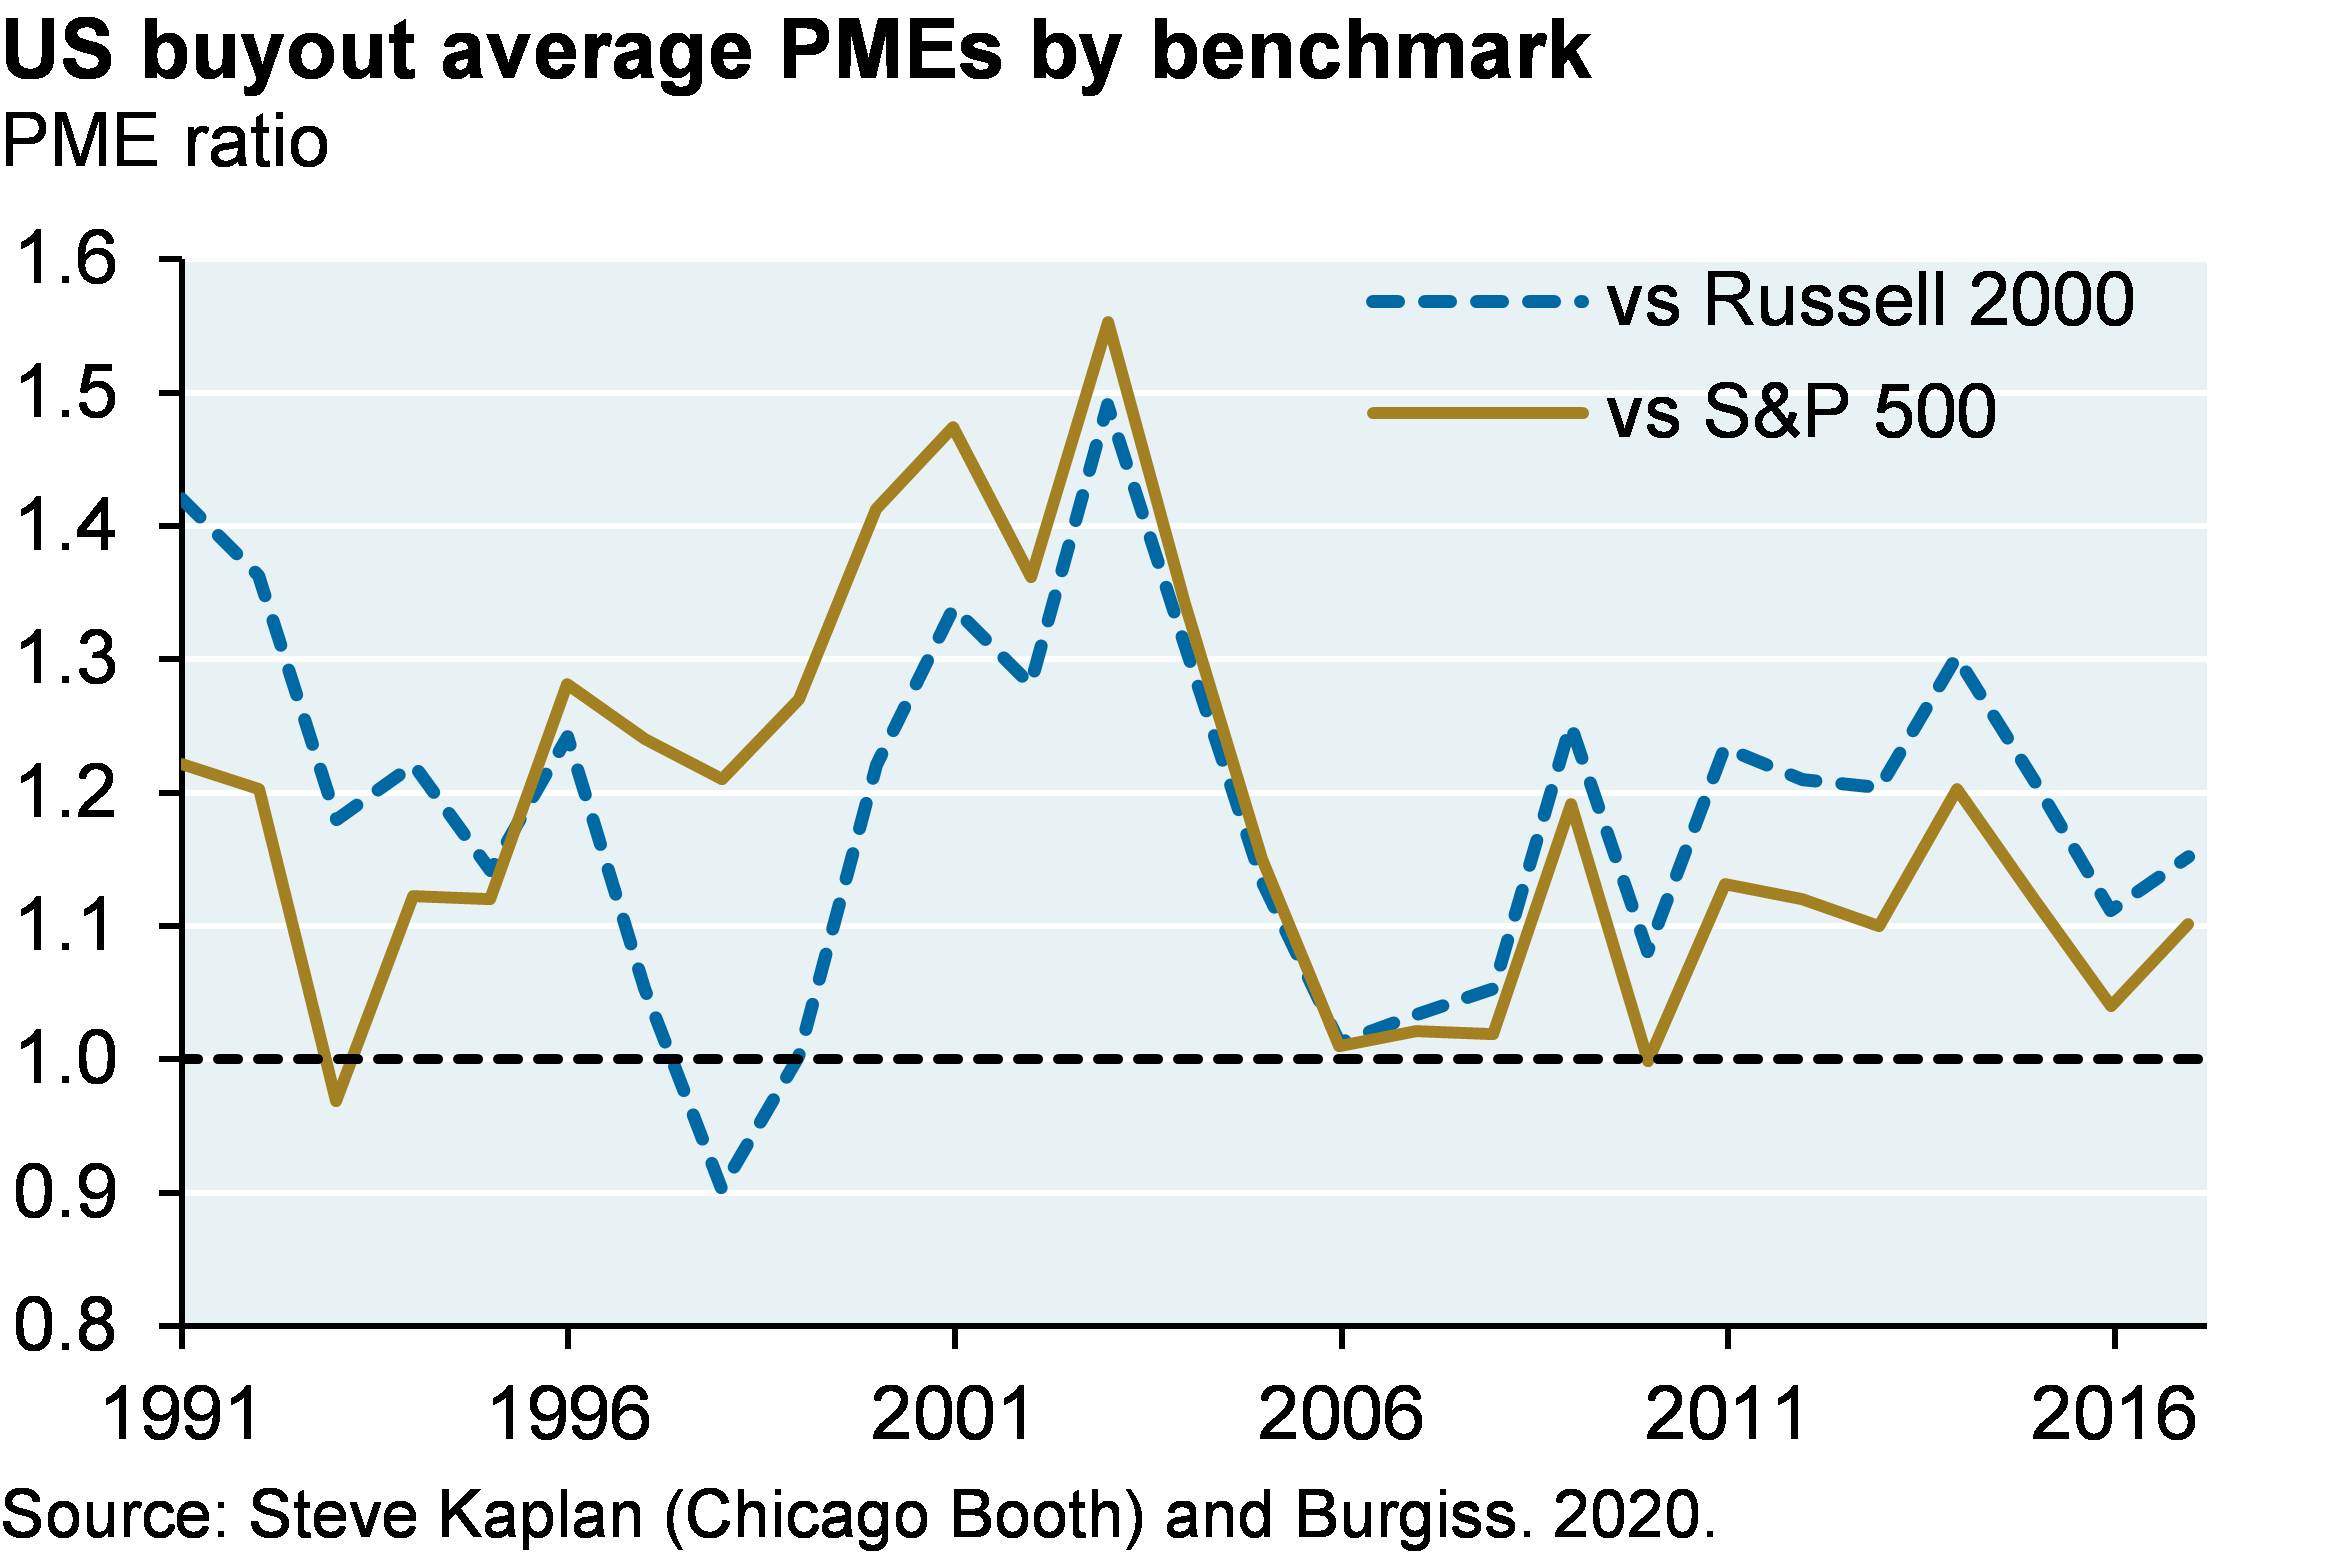 Line chart which shows average US buyout public market equivalent ratios (PME) versus both the Russell 2000 and the S&P 500 by vintage year. PME compares private equity commitments and distributions to investments in public equity markets in the same time period. The result is an MOIC of private equity performance vs the public equity benchmark. The chart illustrates the relative performance differences between the S&P 500 and Russell 2000 over time. Since the S&P 500 has outperformed the Russell 2000 since 2006, buyout PMEs vs the Russell 2000 are higher than buyout PMEs vs S&P 500 over the same time period.